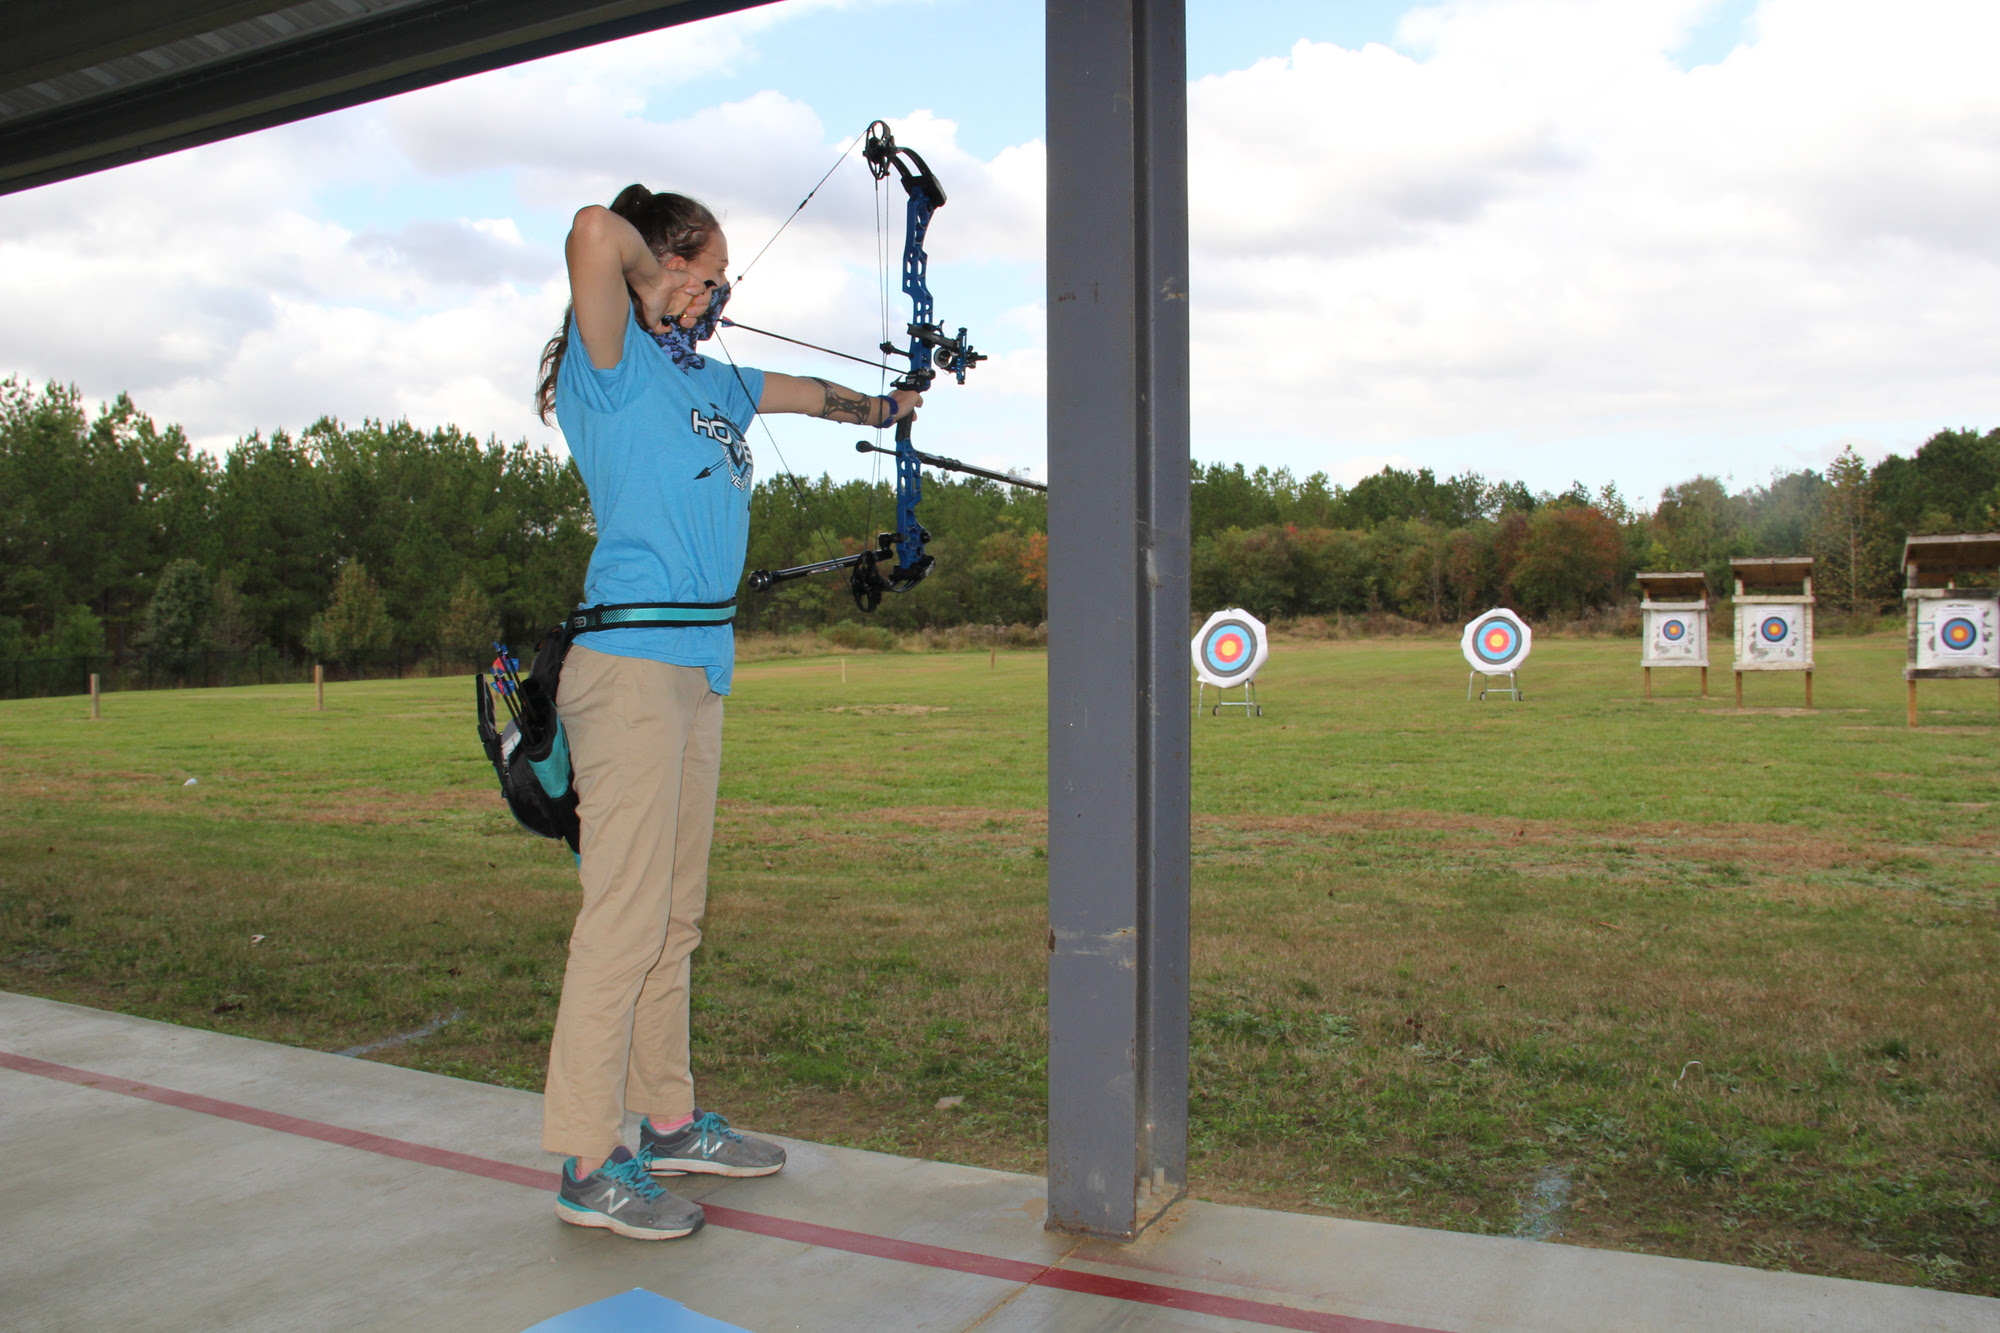 Archery park opens in Hoover